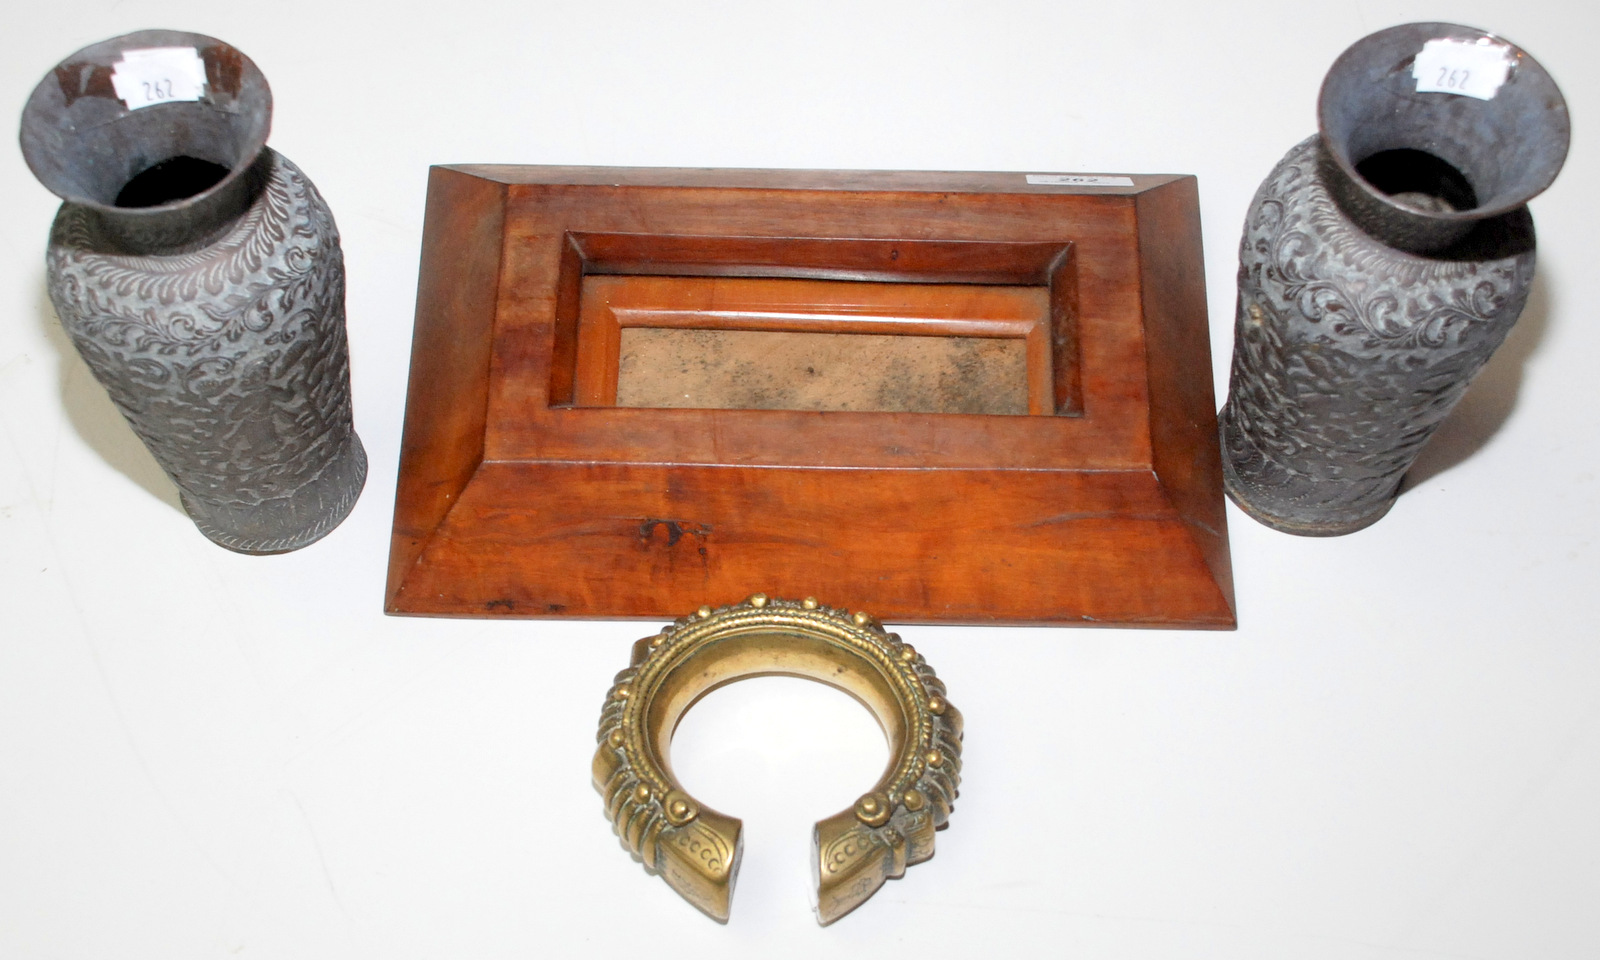 A small frame, a pair of Indian chased copper vases and a heavy African brass bangle.